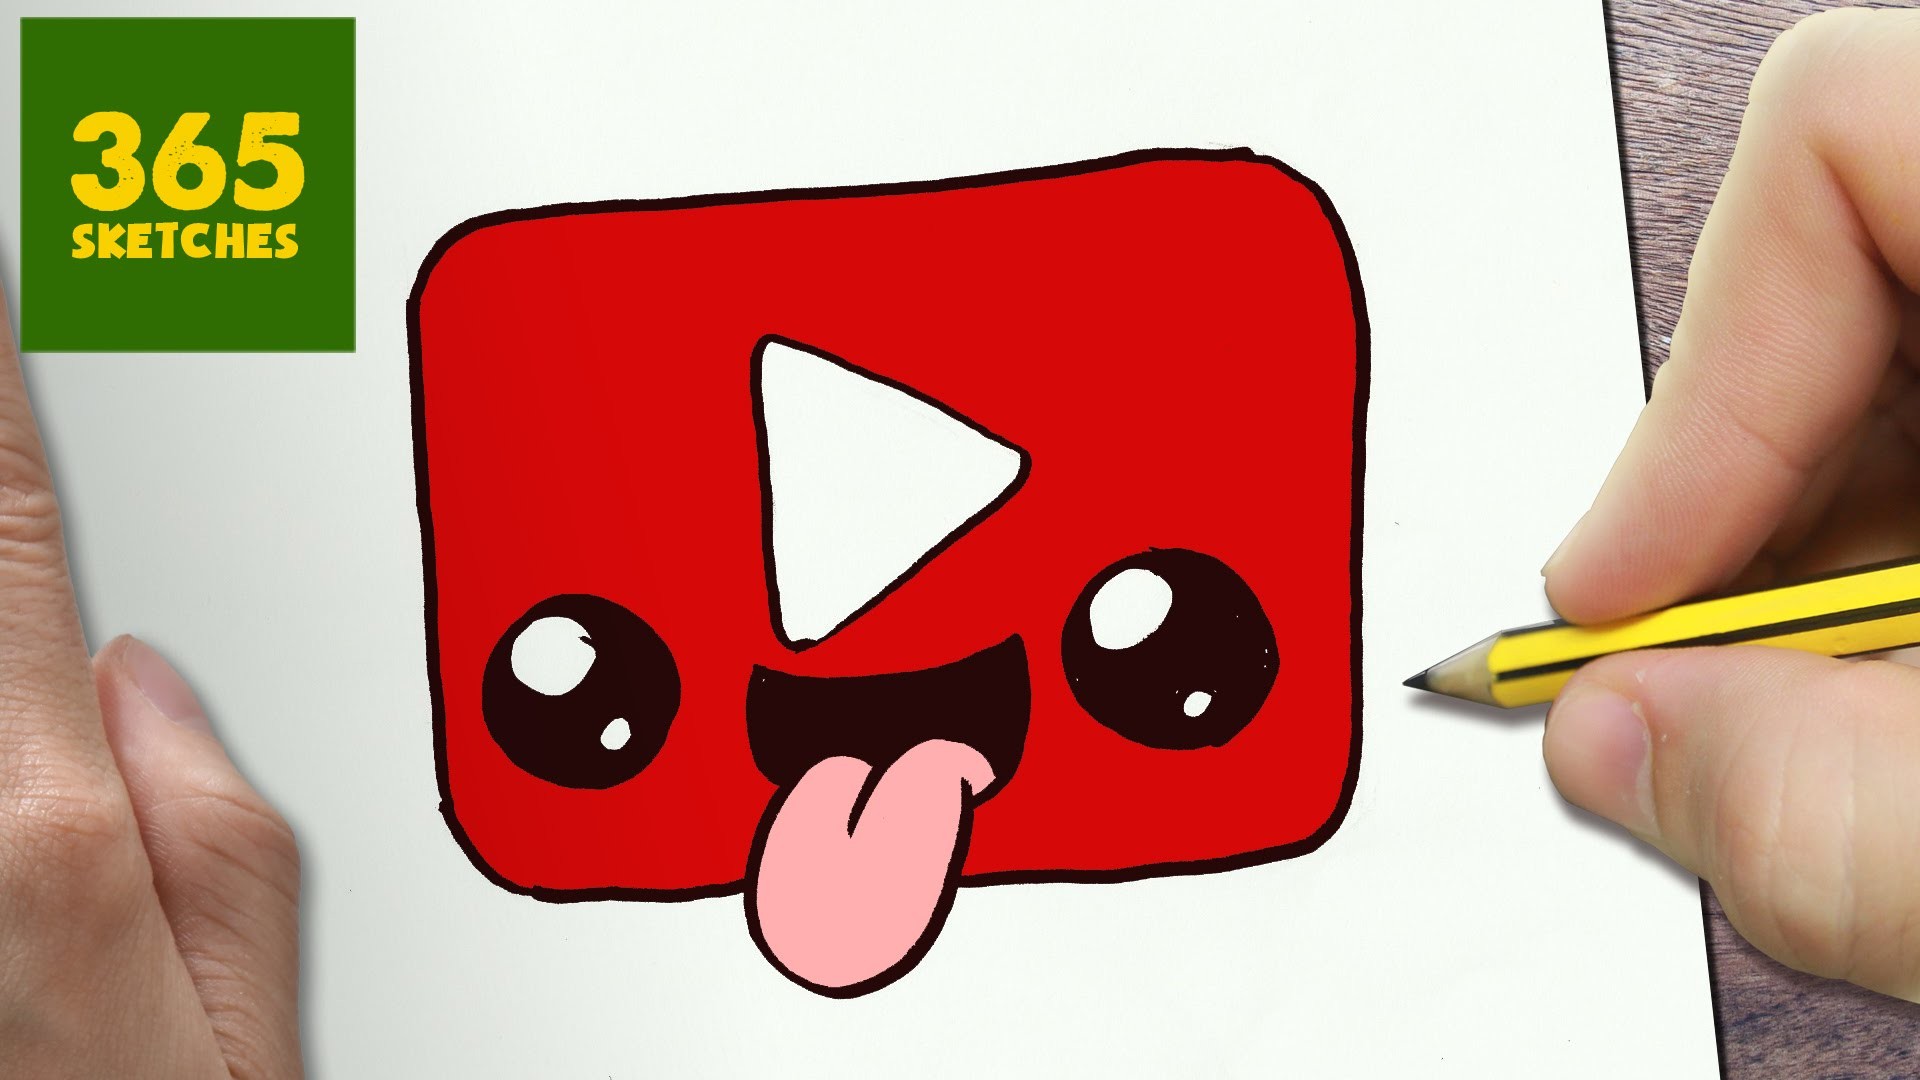 HOW TO DRAW A YOUTUBE LOGO CUTE, Easy step by step drawing